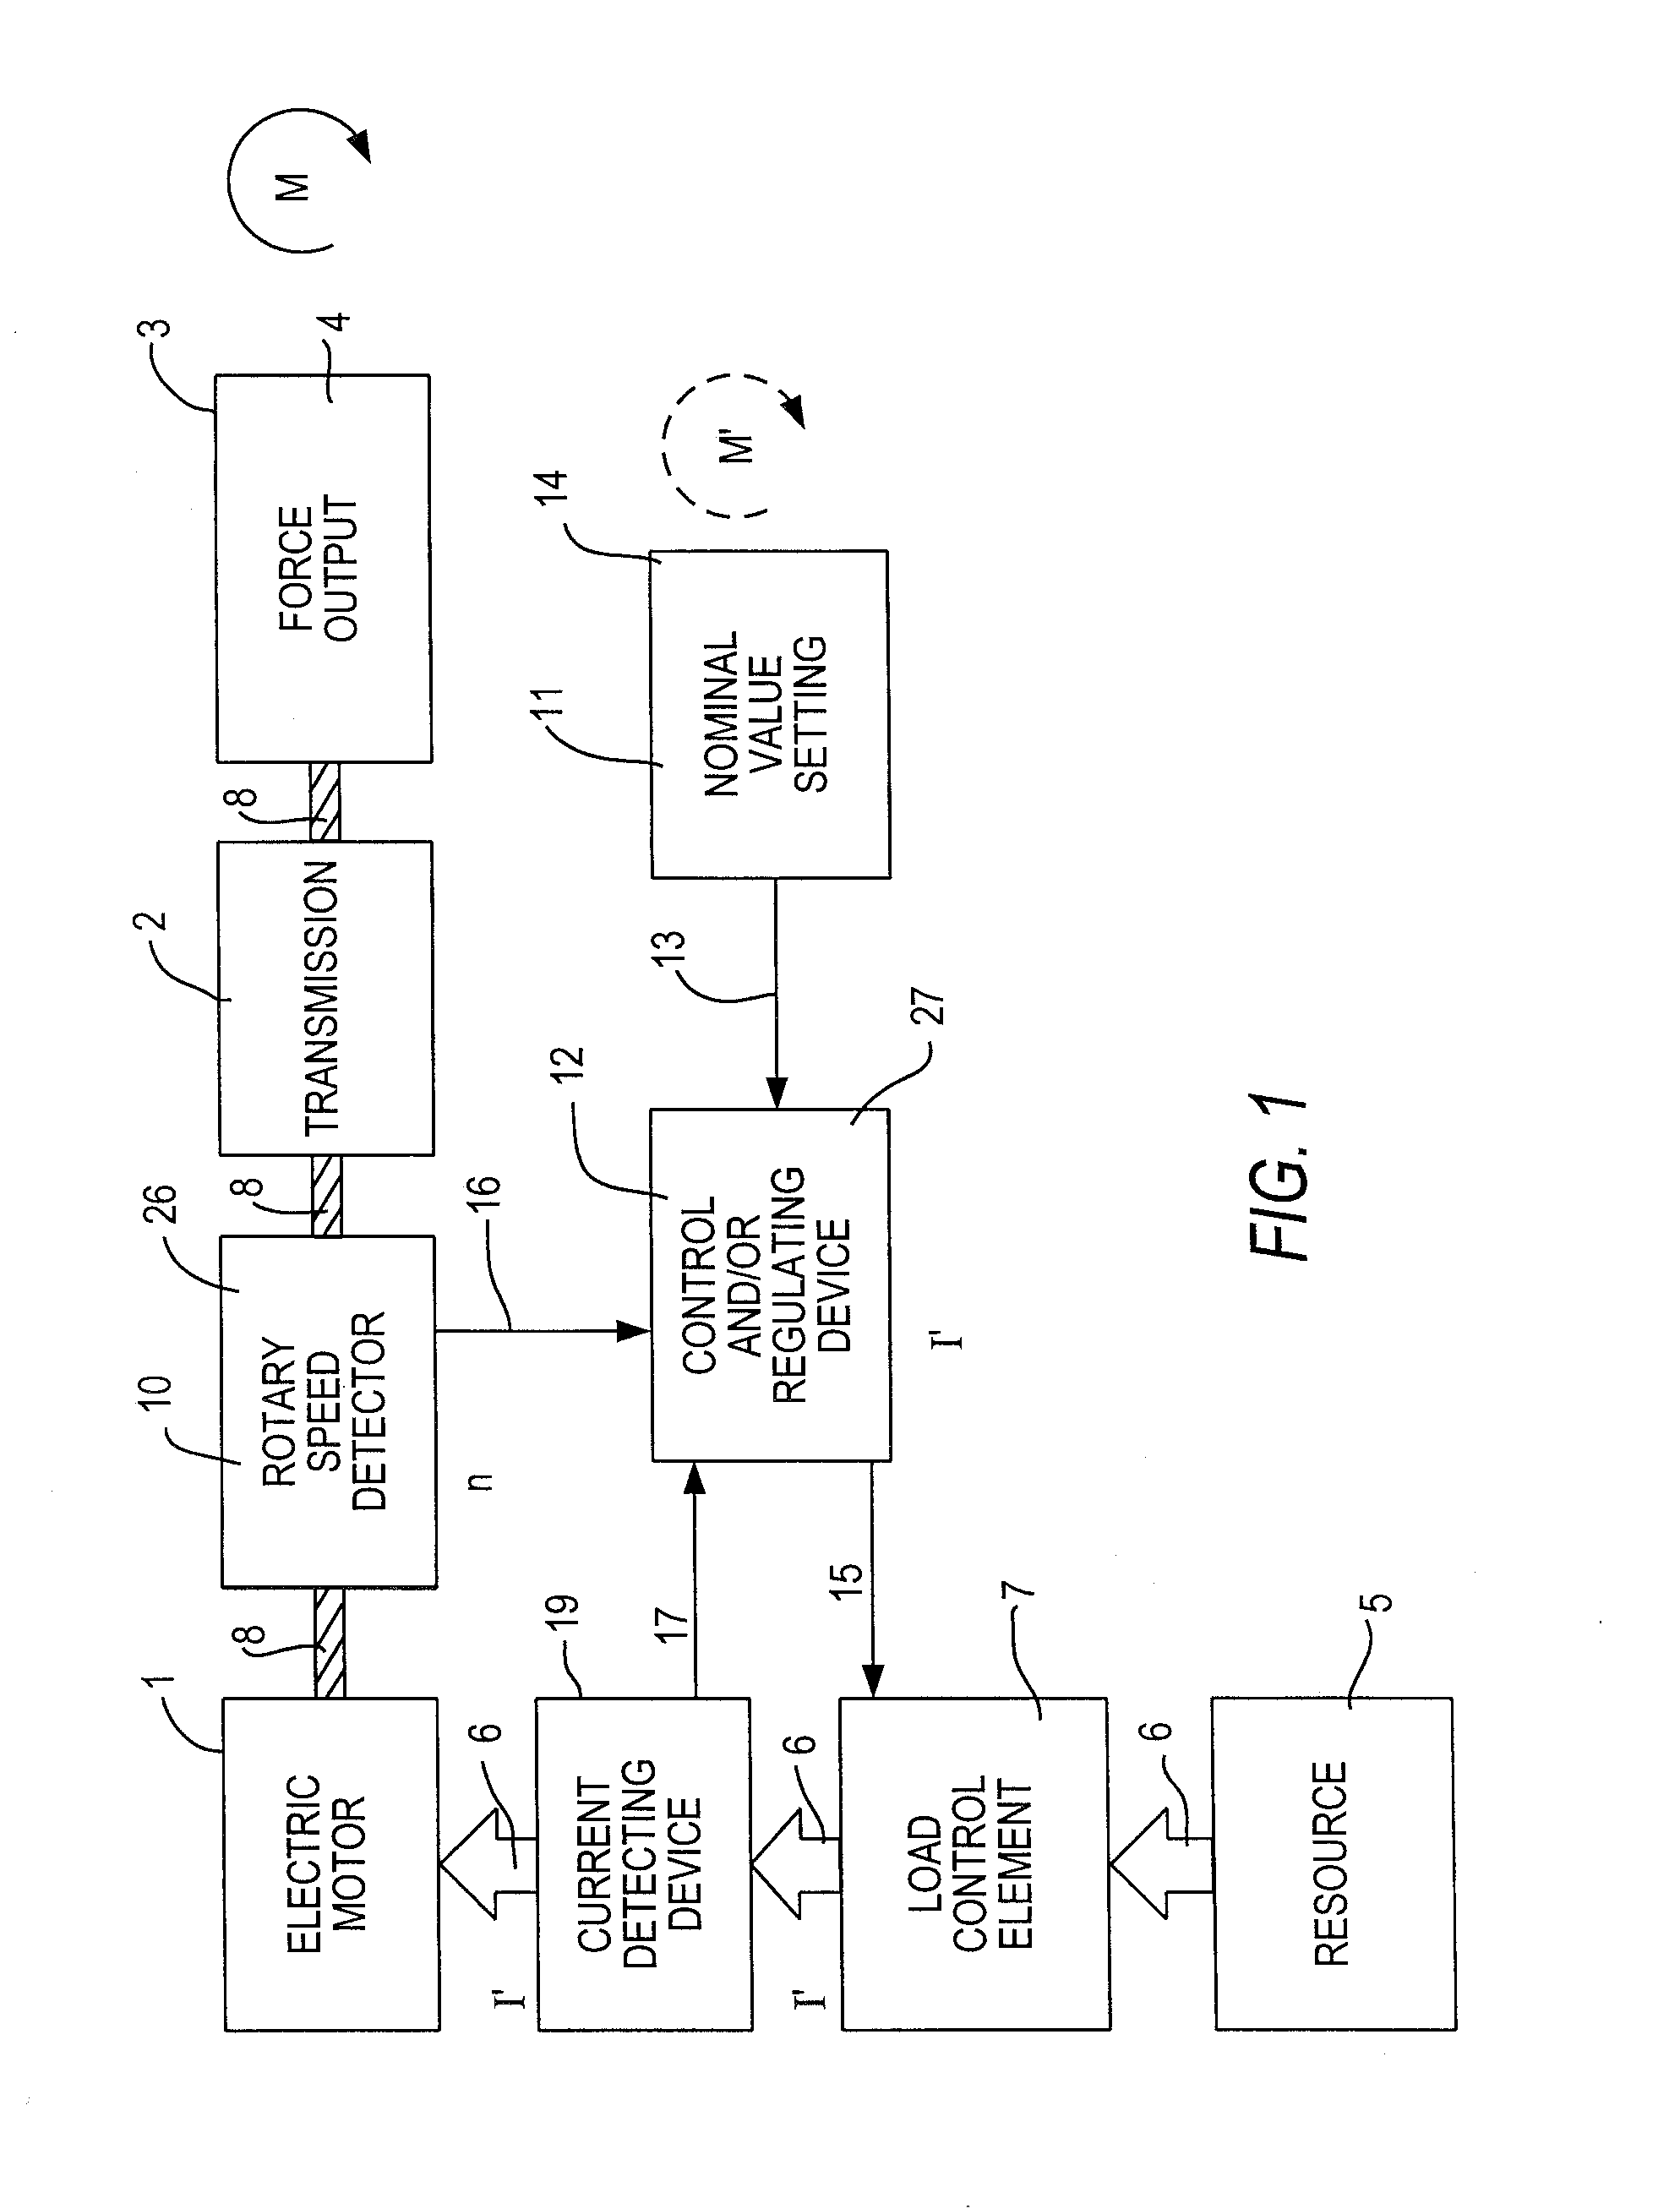 Torque limiting device for an electric motor